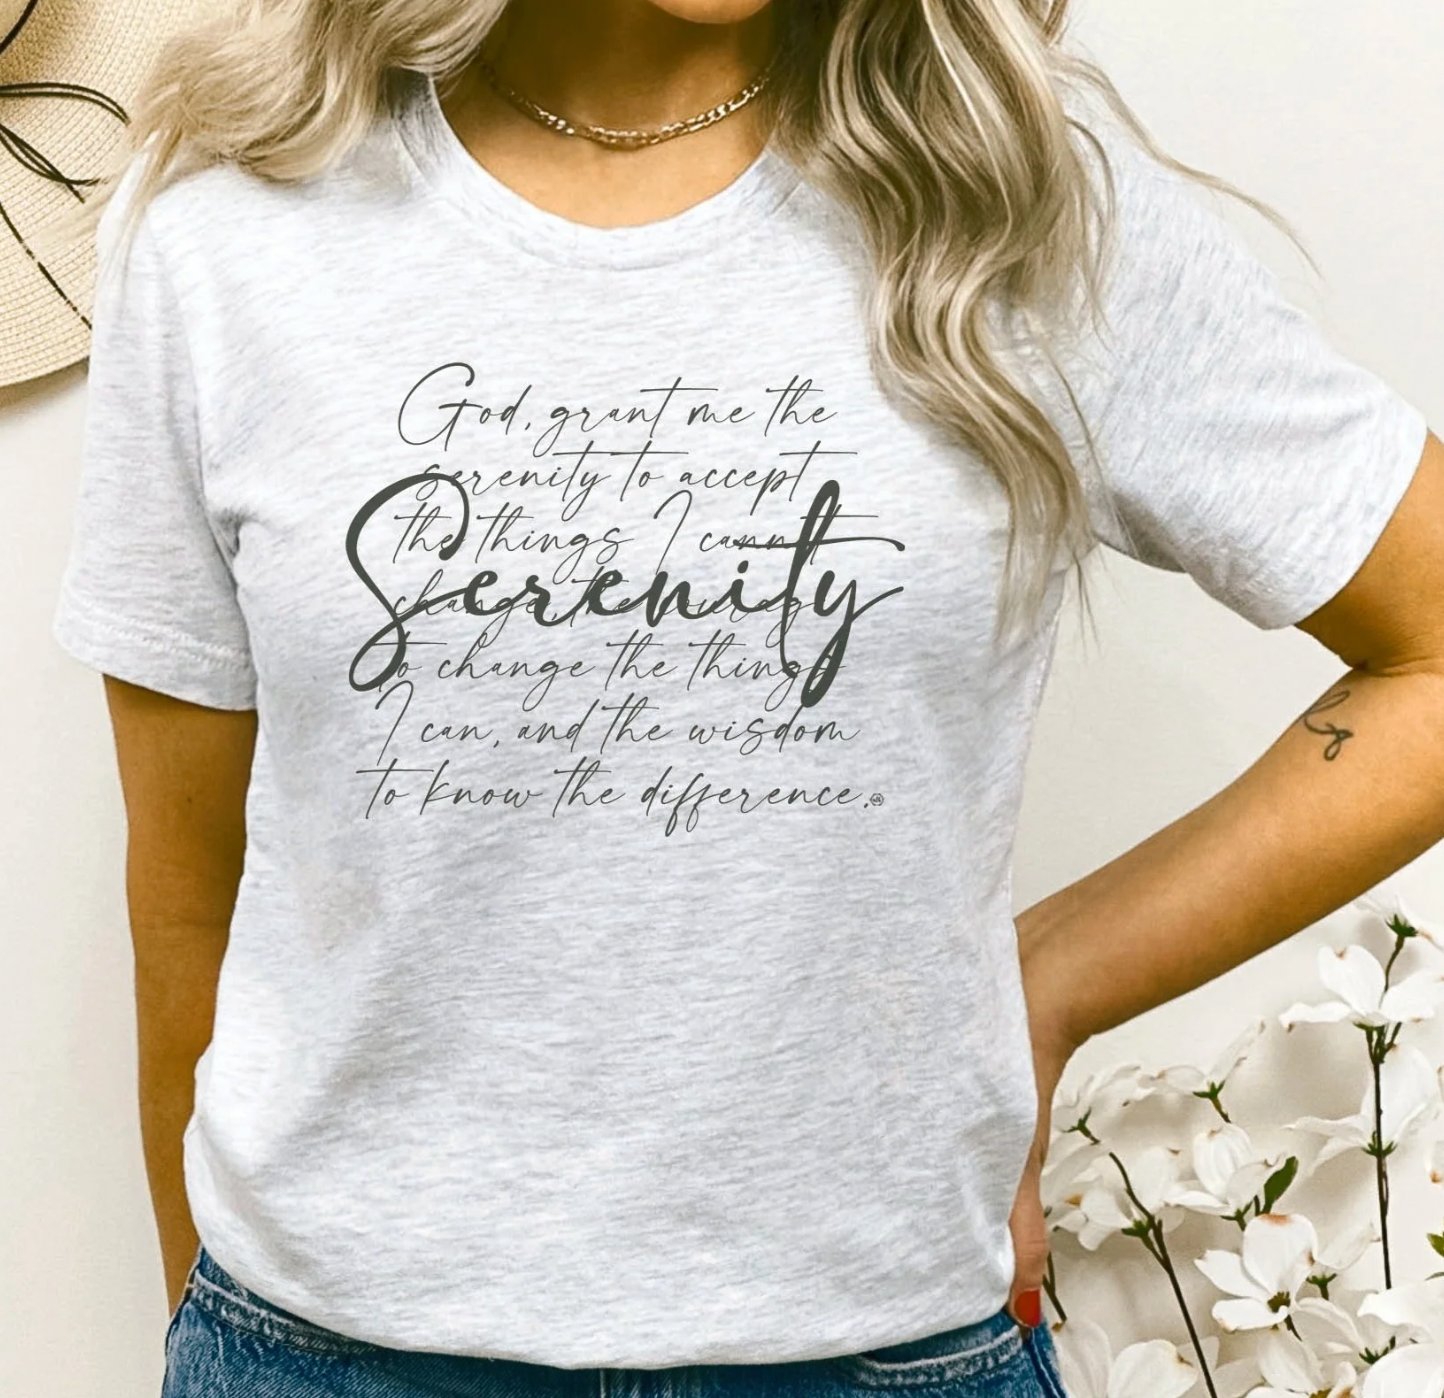 Serenity Graphic Tee by Never Lose Hope